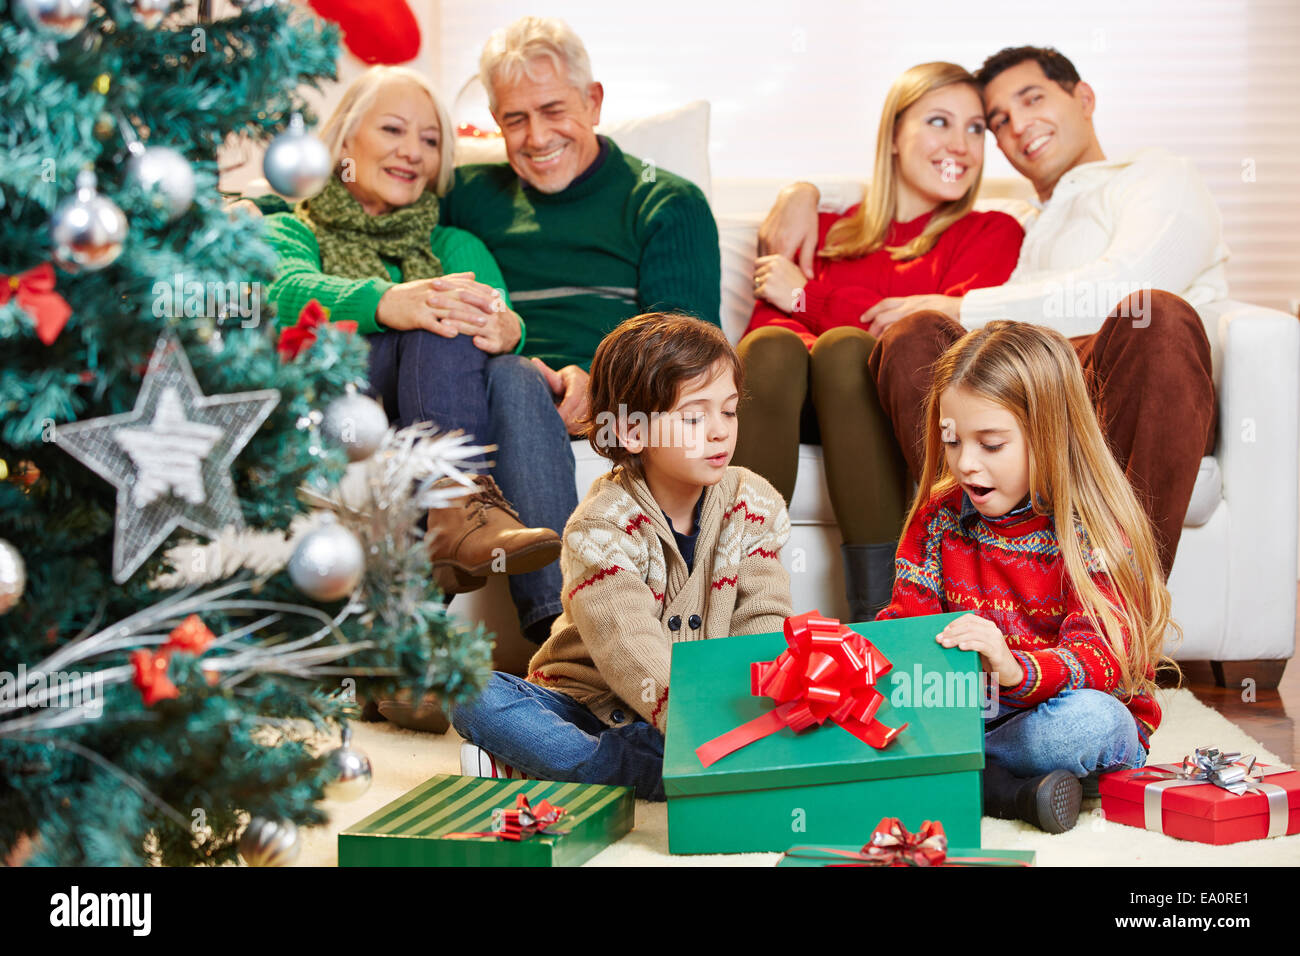 Happy children opening gifts at christmas while parents and grandparents are watching Stock Photo